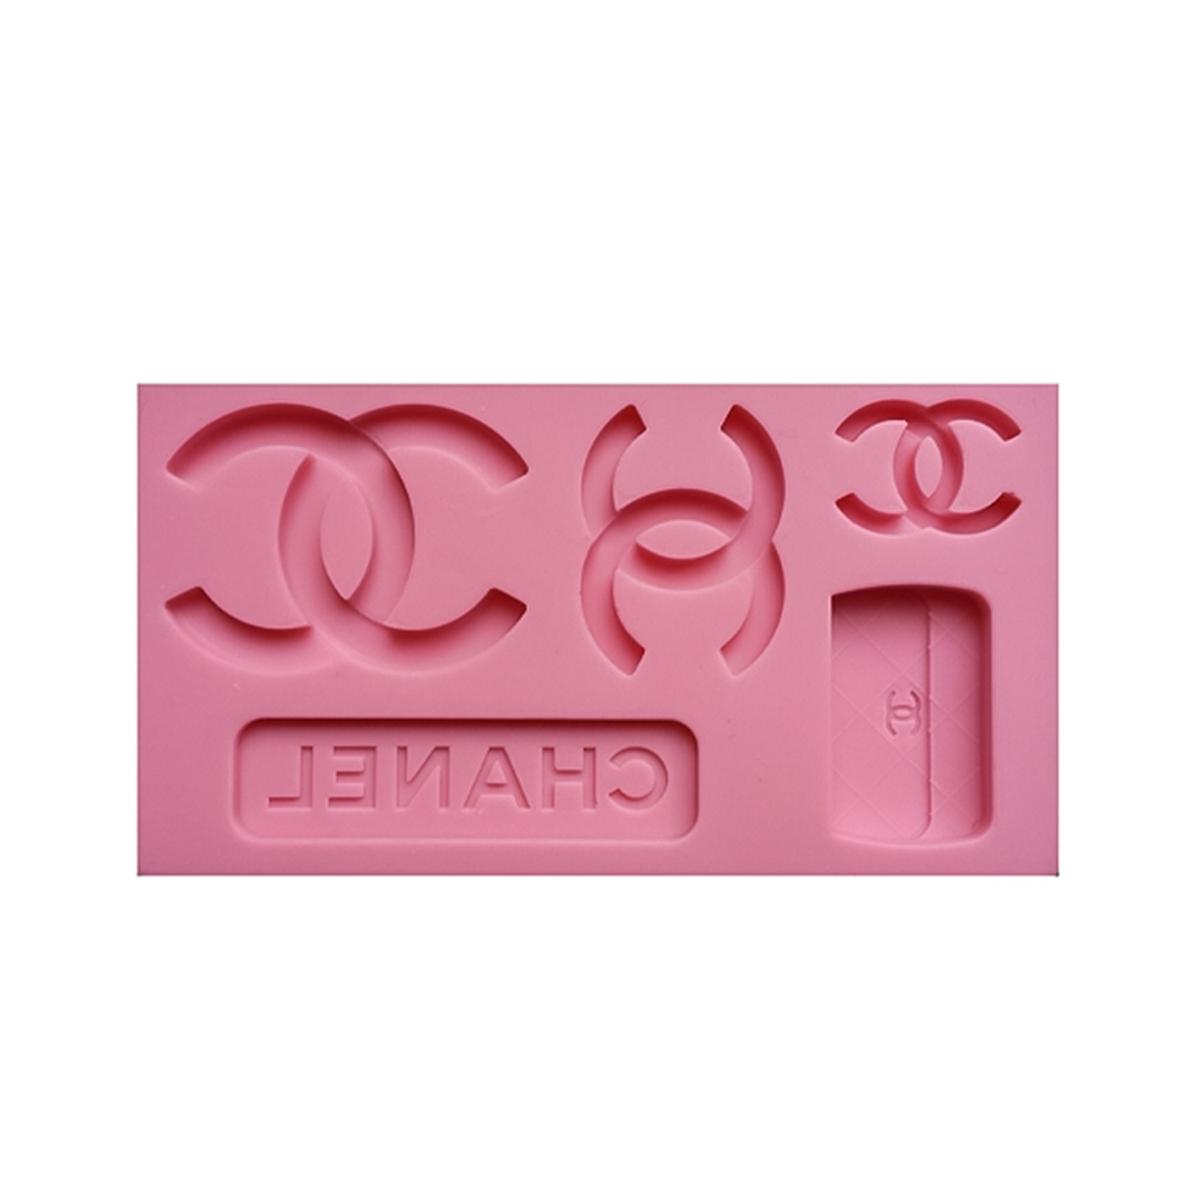 OUR CREATIONS LV Gucci Chanel Hermes Dior YSL Silicon Mould Luxury Brand